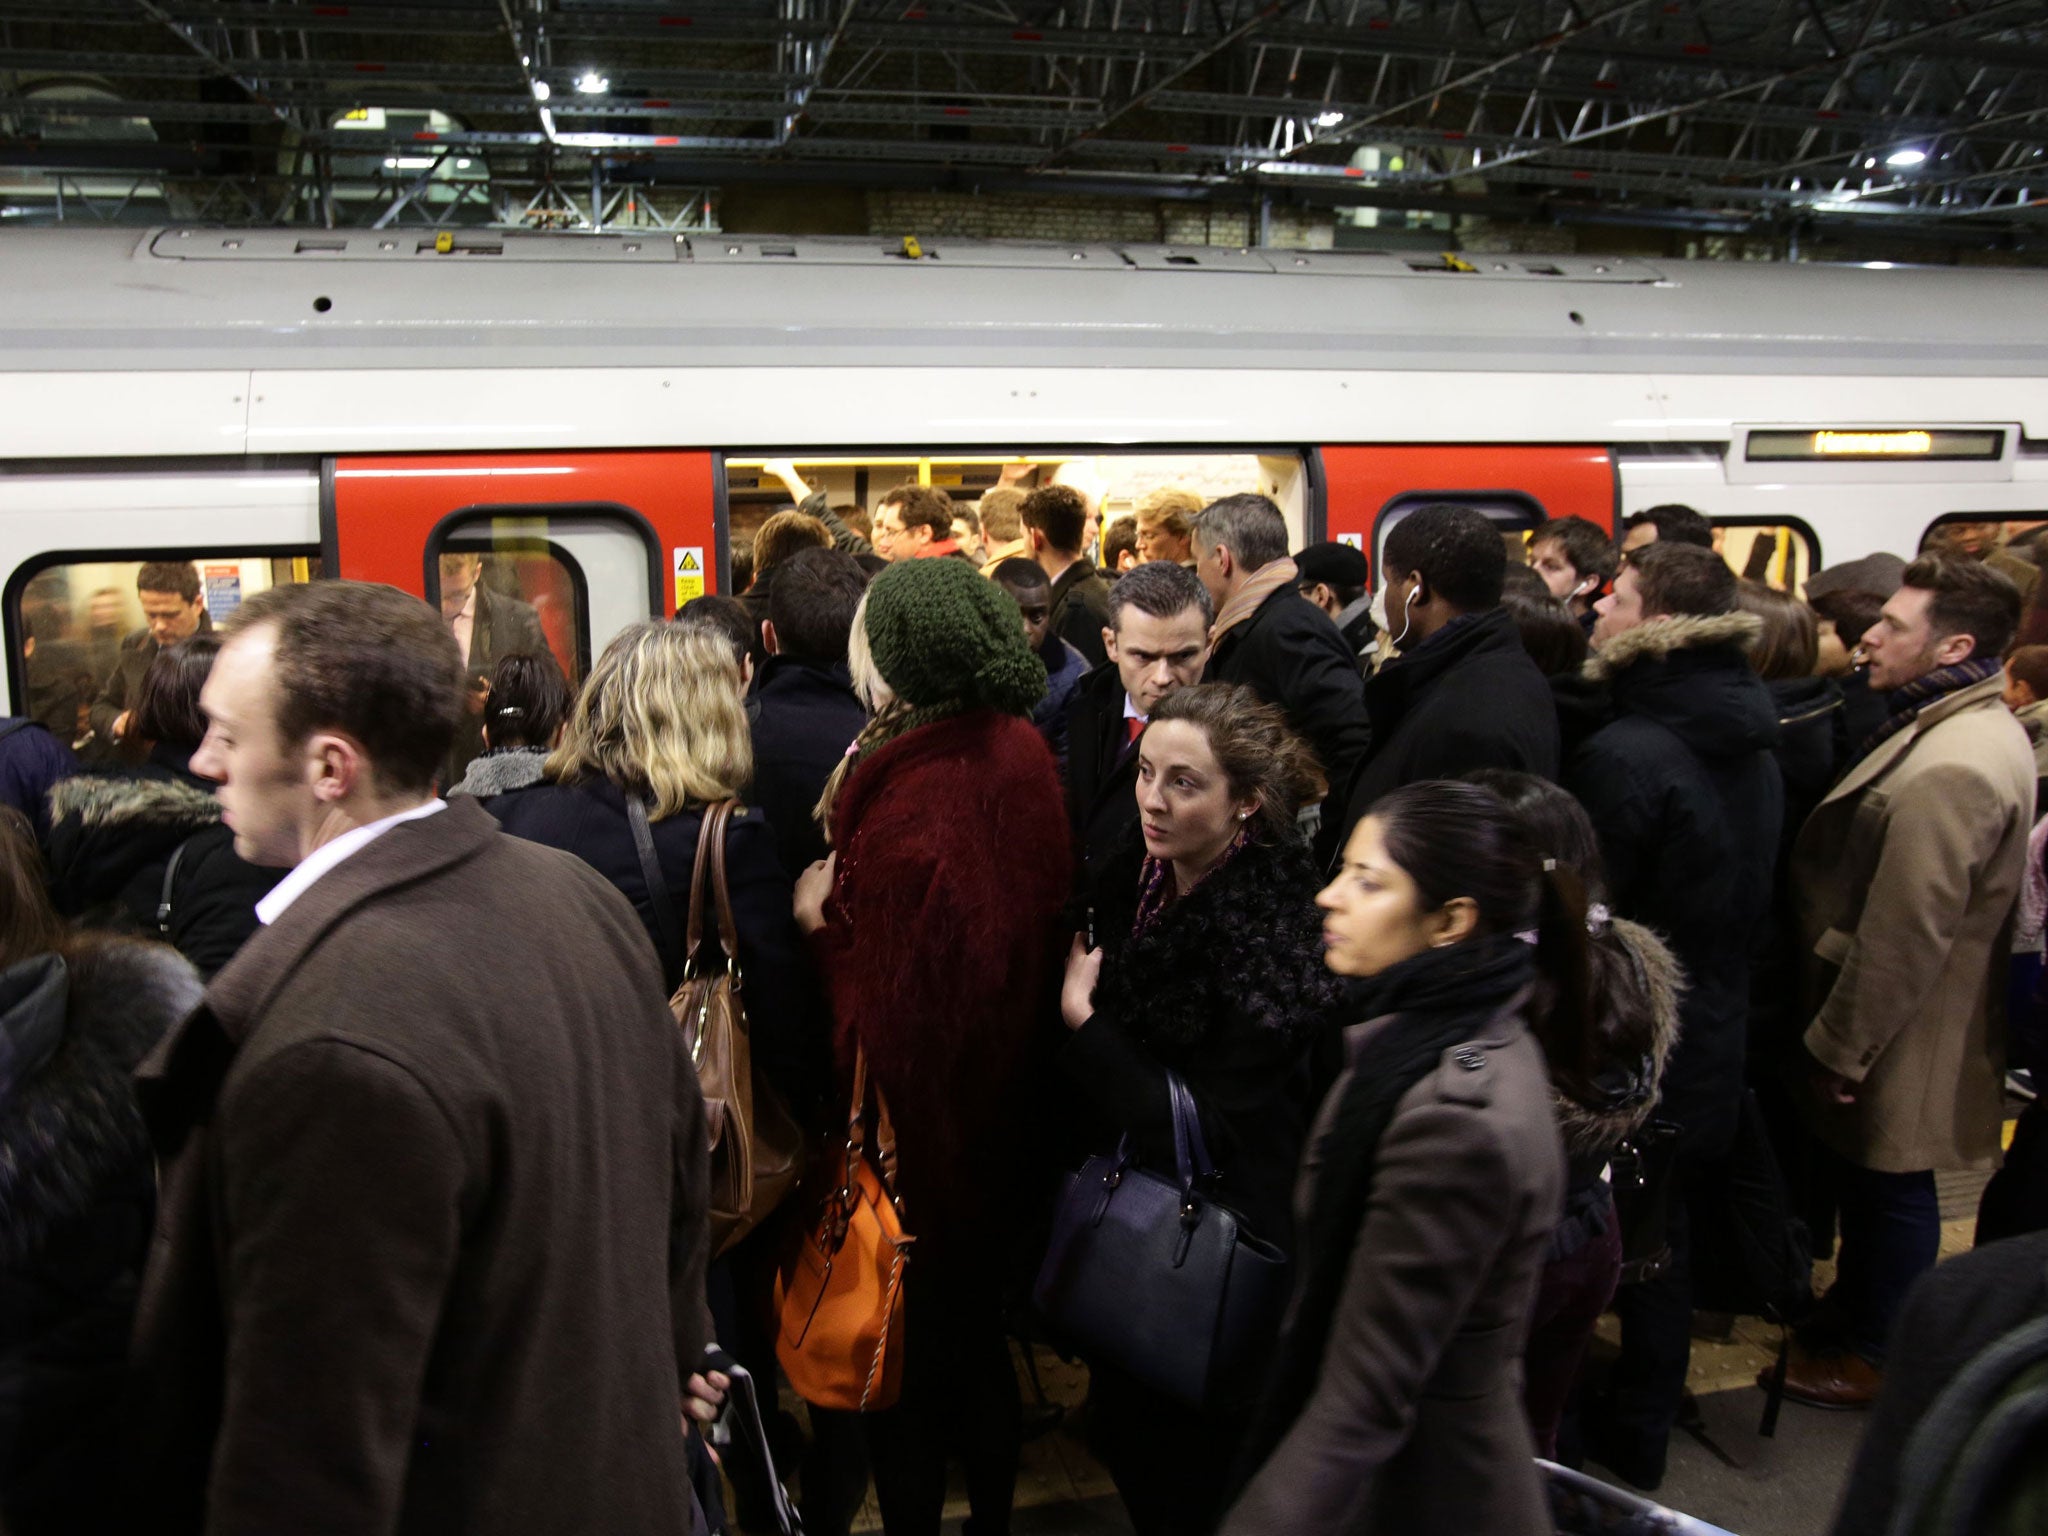 Commuters boarding a train at Farringdon Underground station